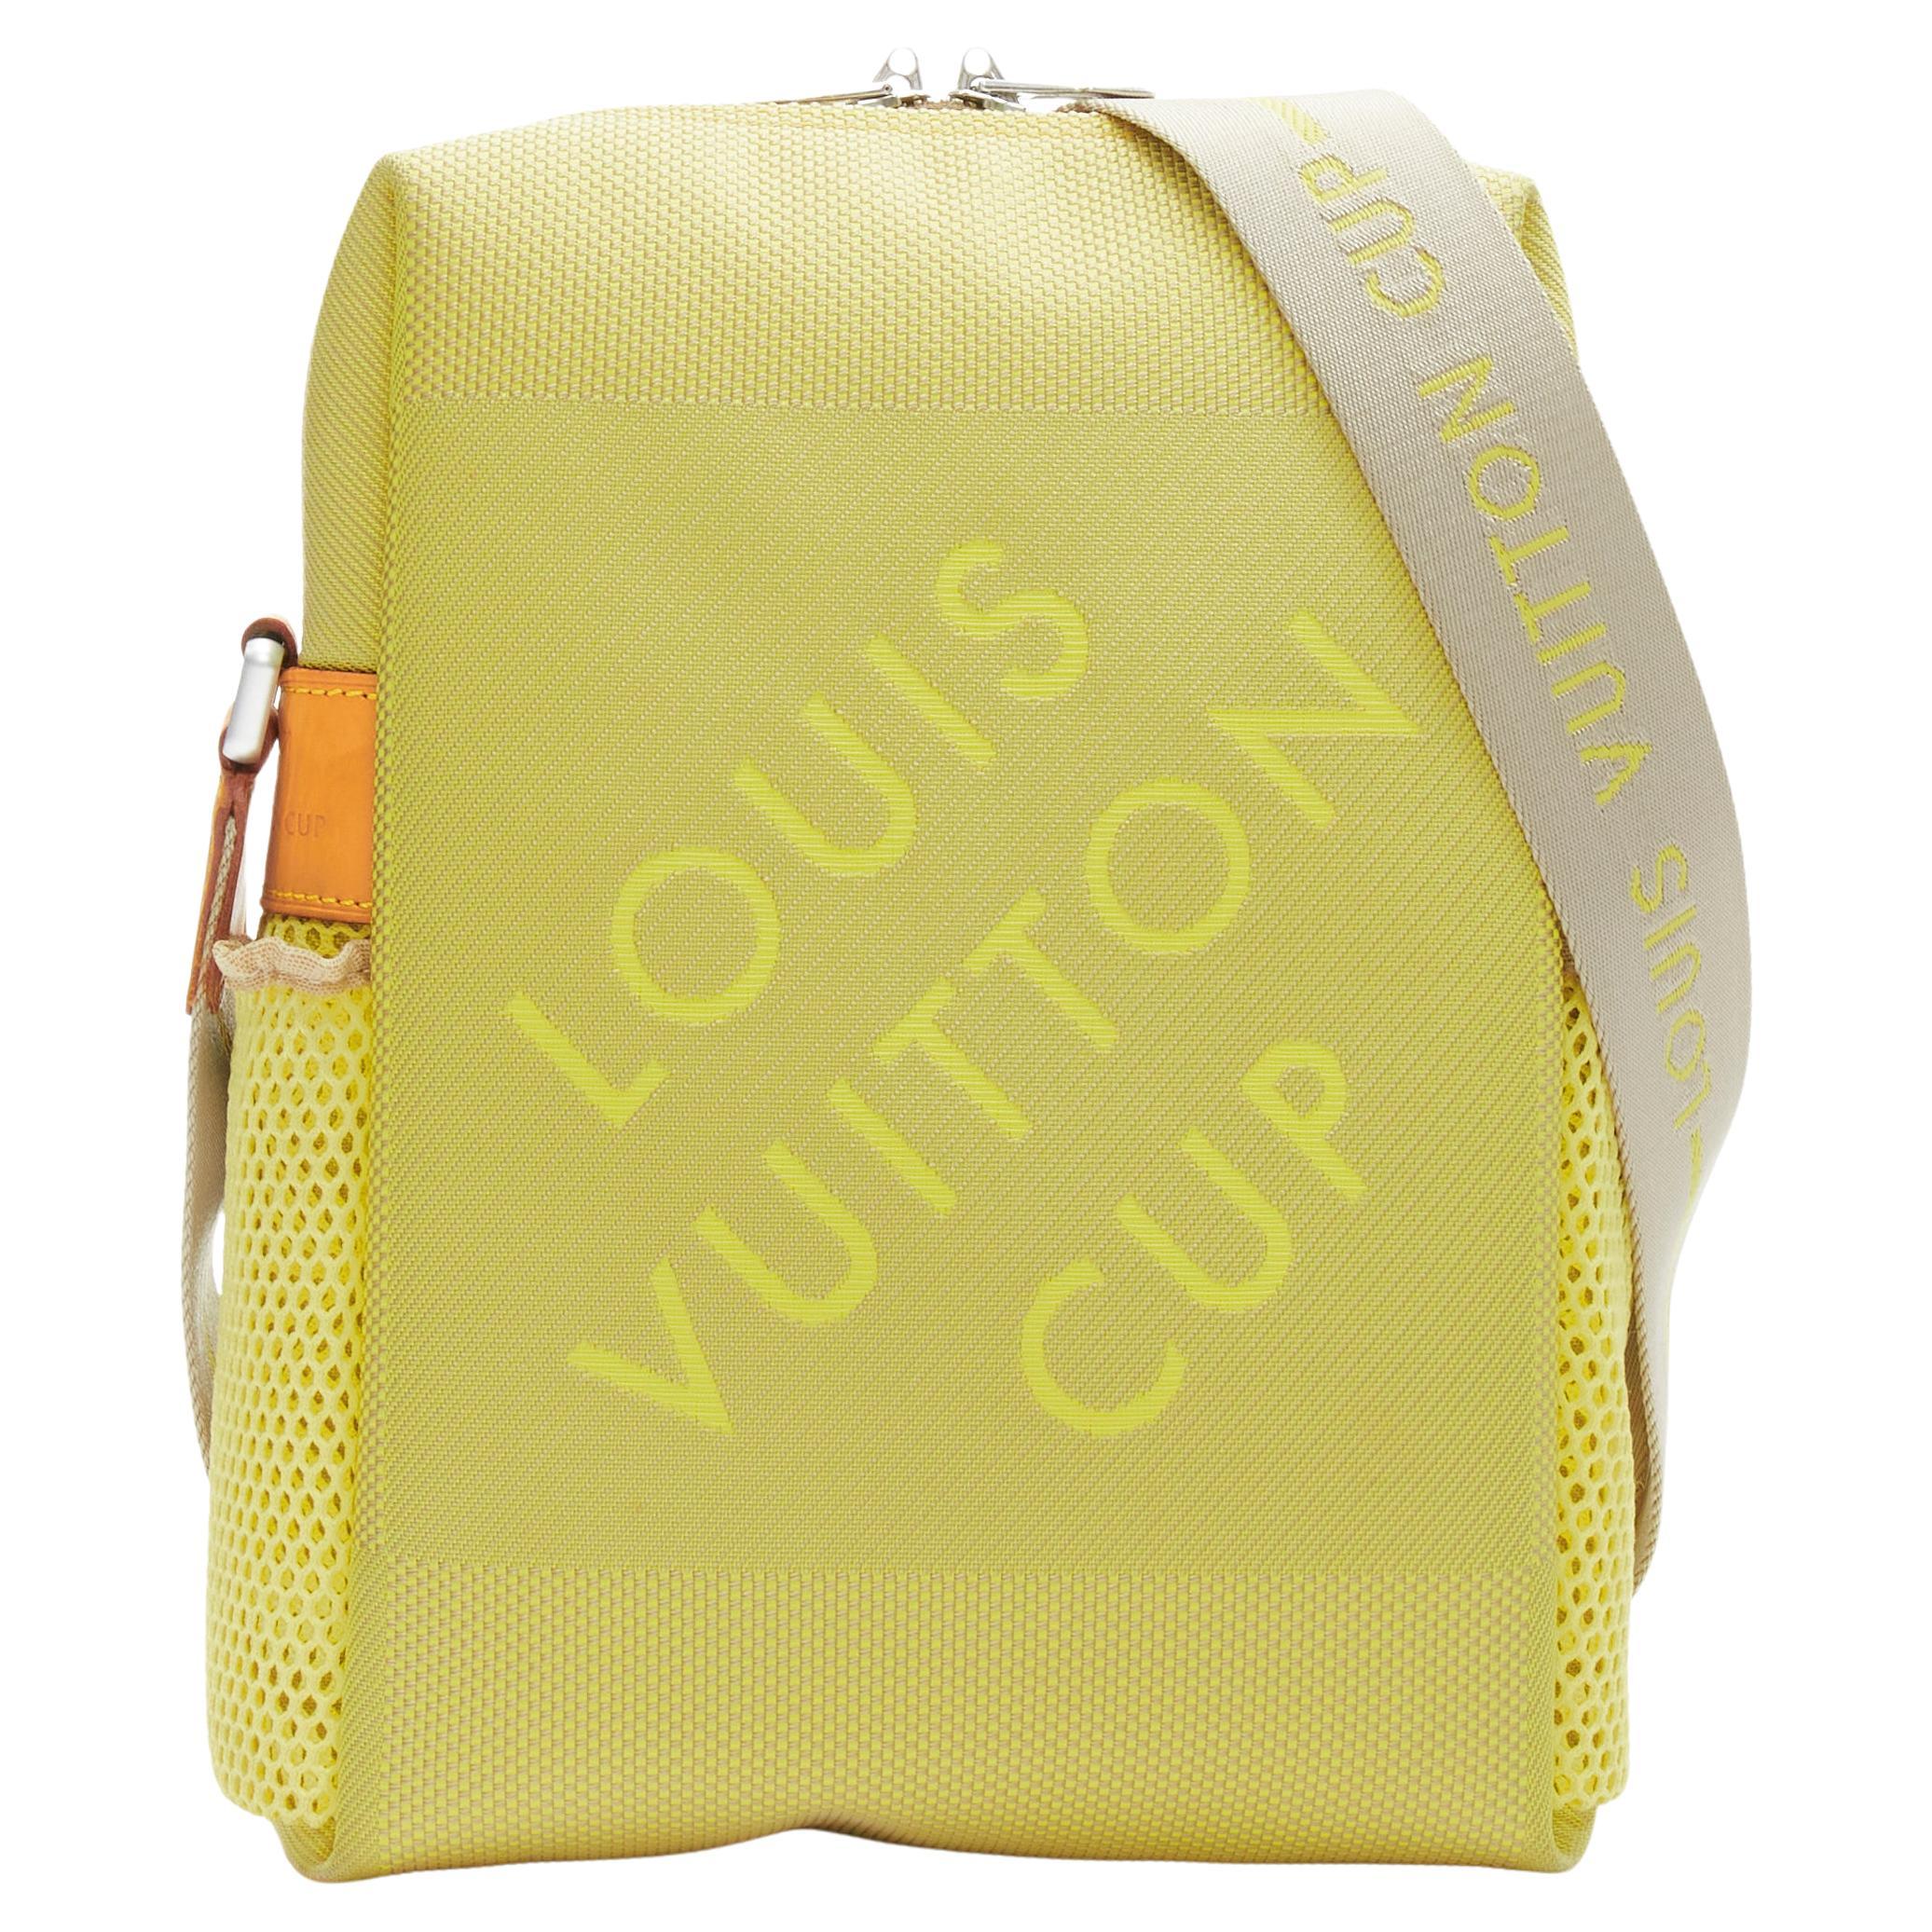 Louis Vuitton Cup second hand prices